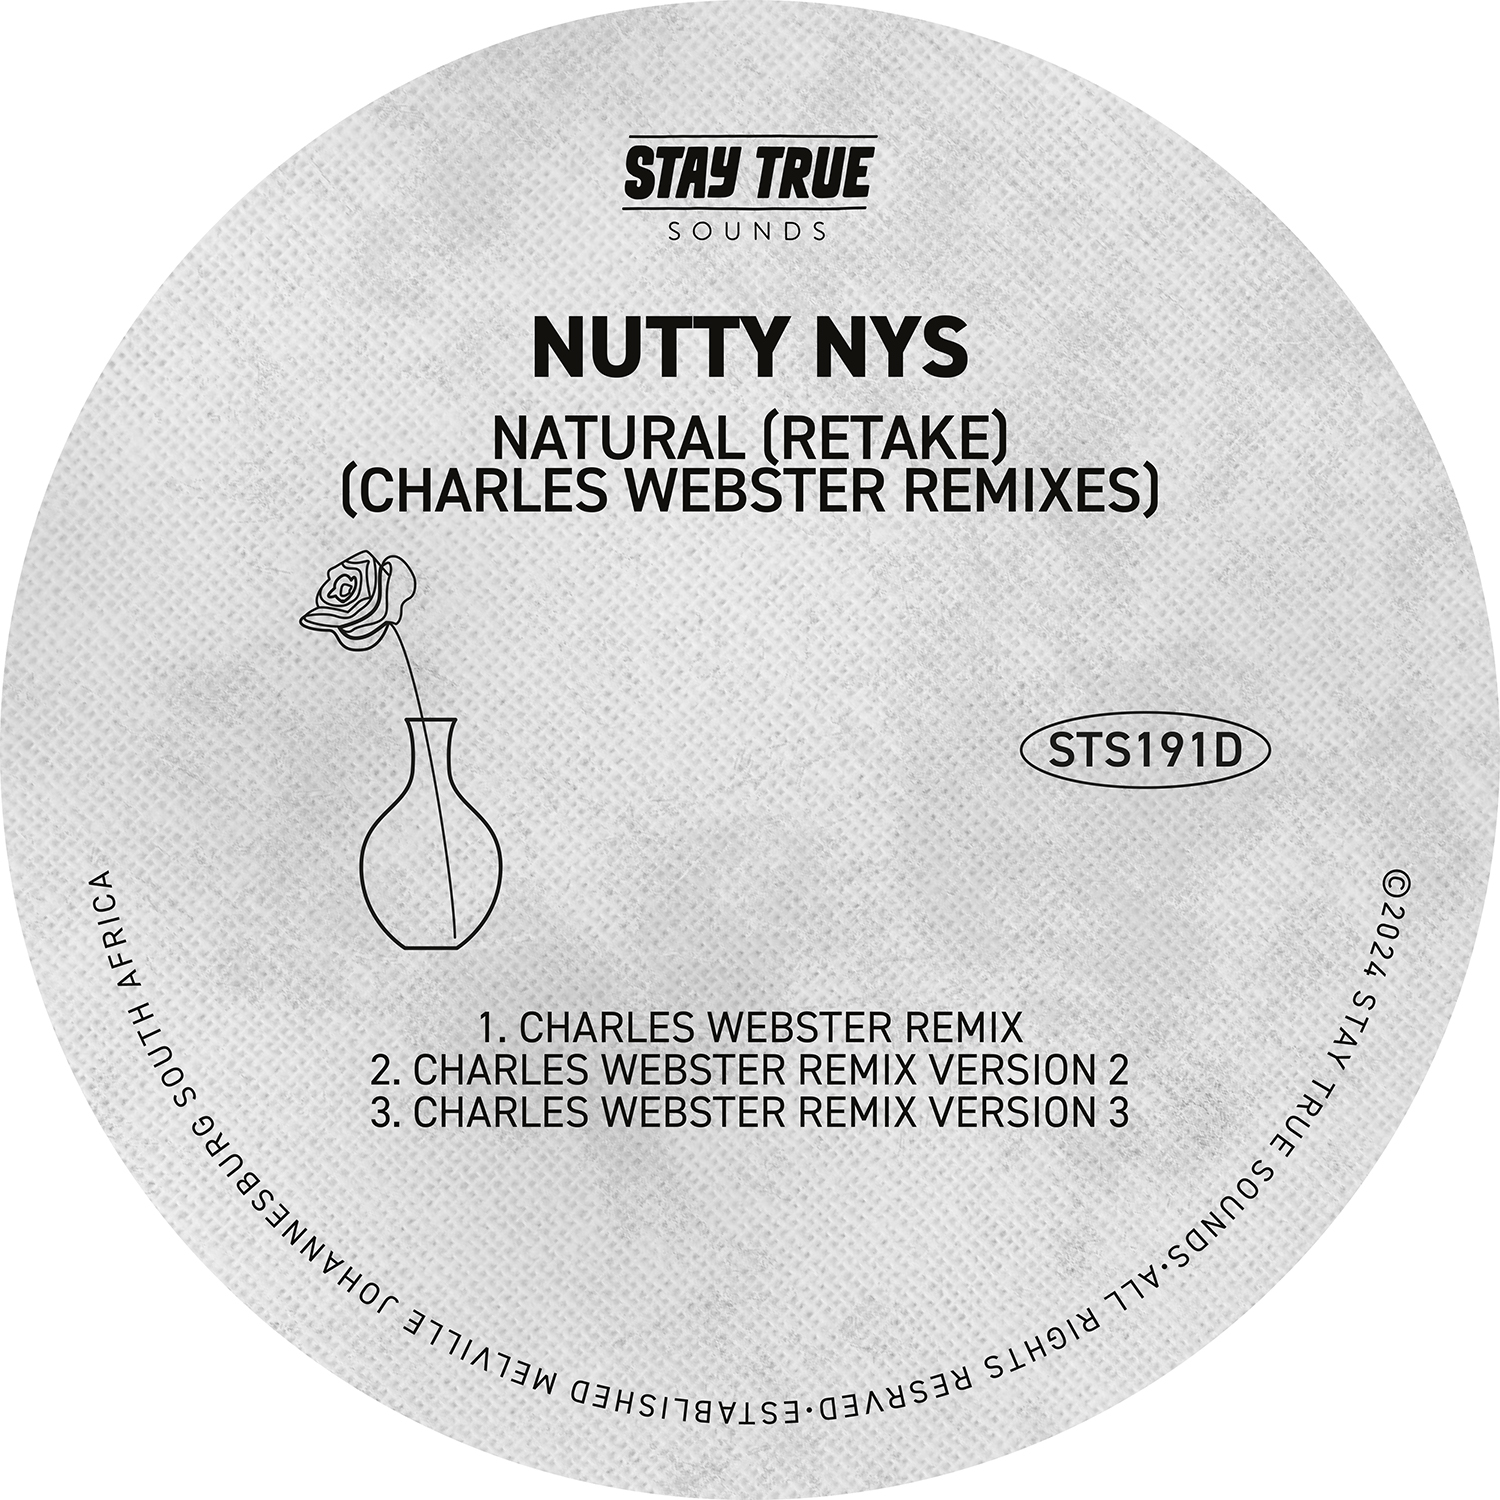 This image is a visual cue for the review of Nutty Nys - Natural (Retake) (Charles Webster Remixes)